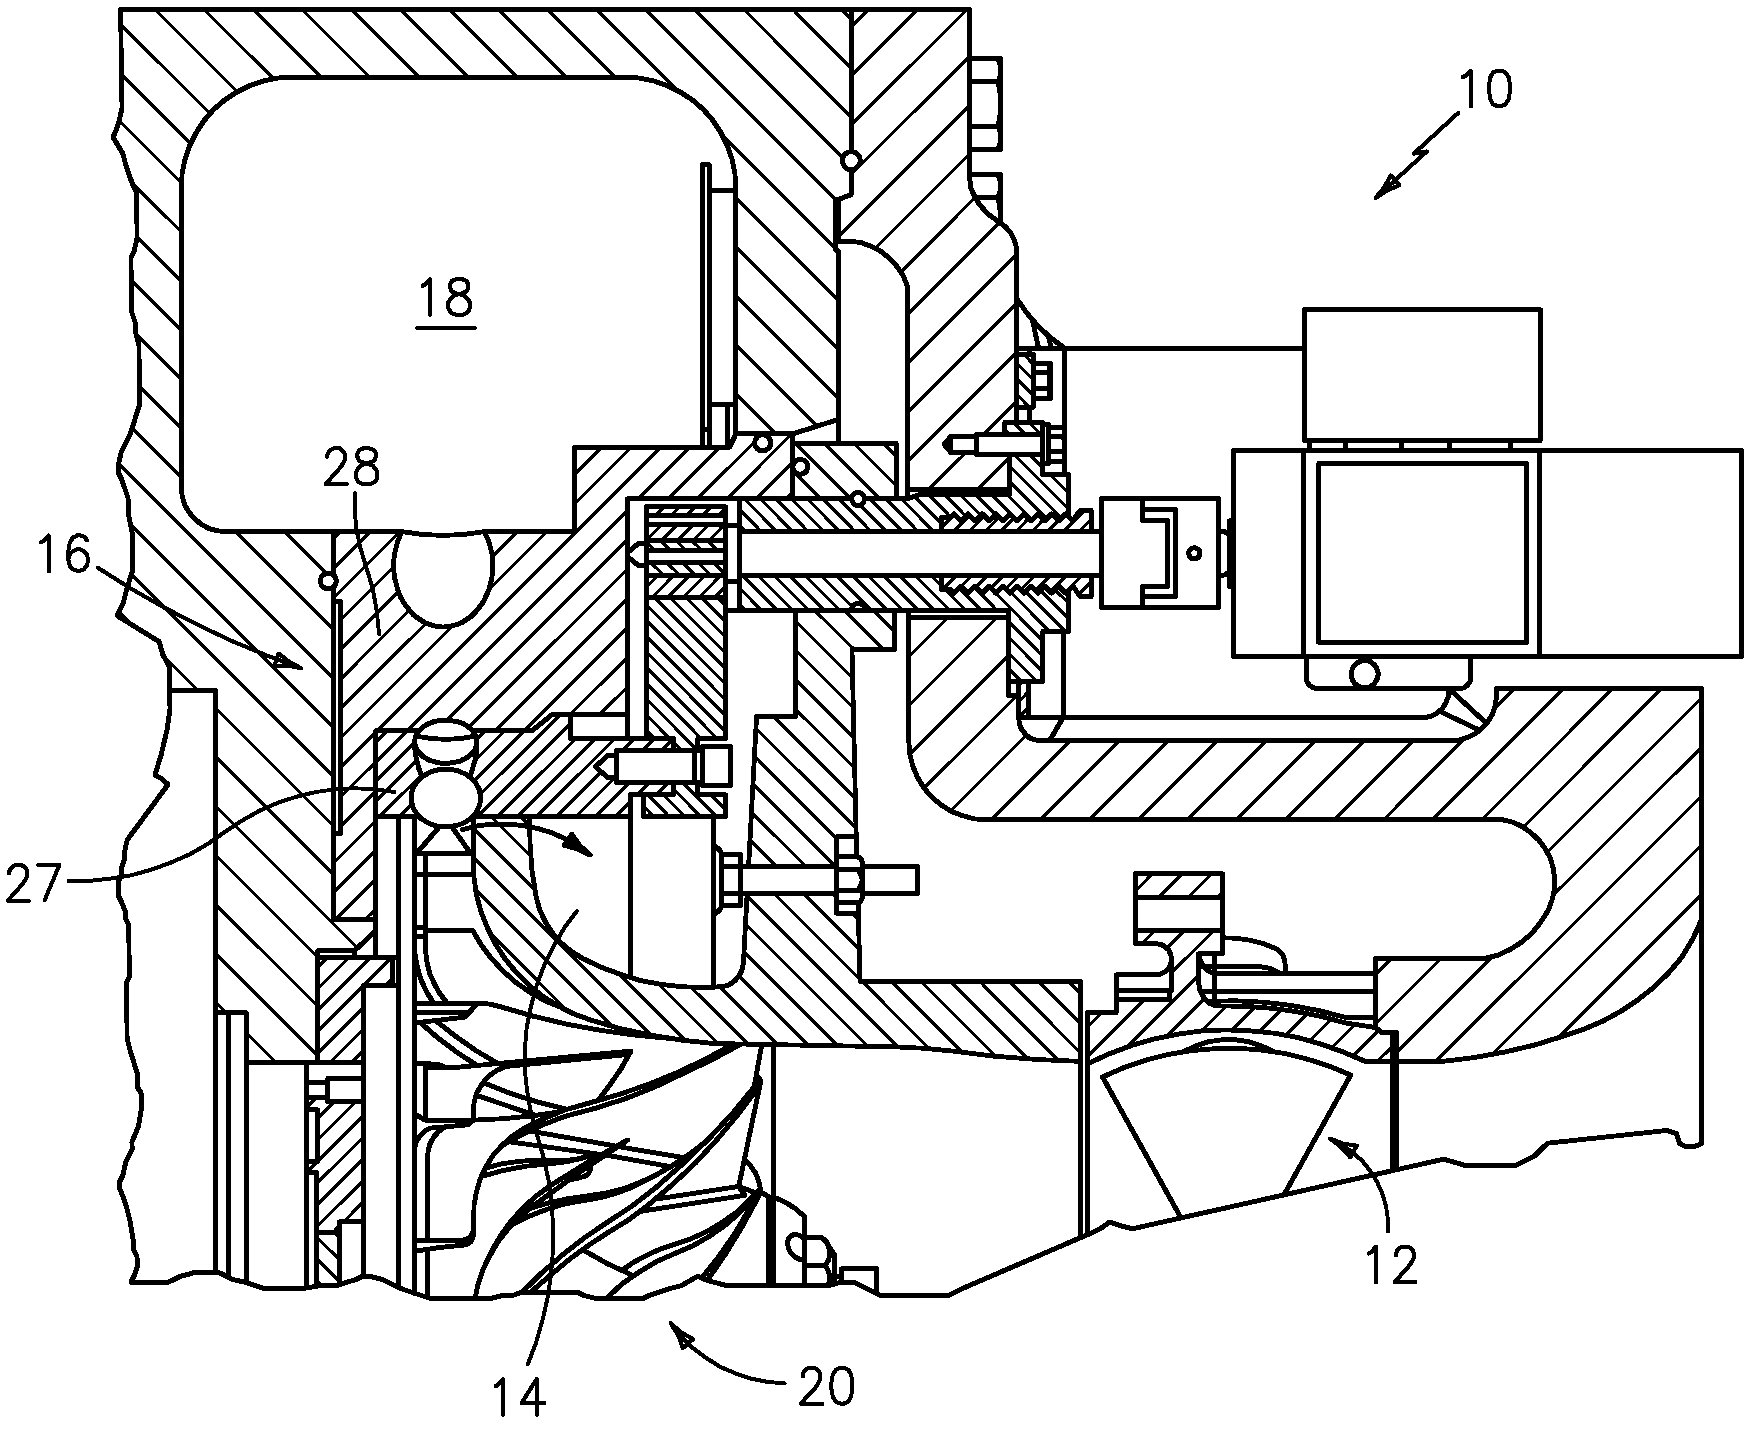 Centrifugal compressor performance by optimizing diffuser surge control and flow control device settings